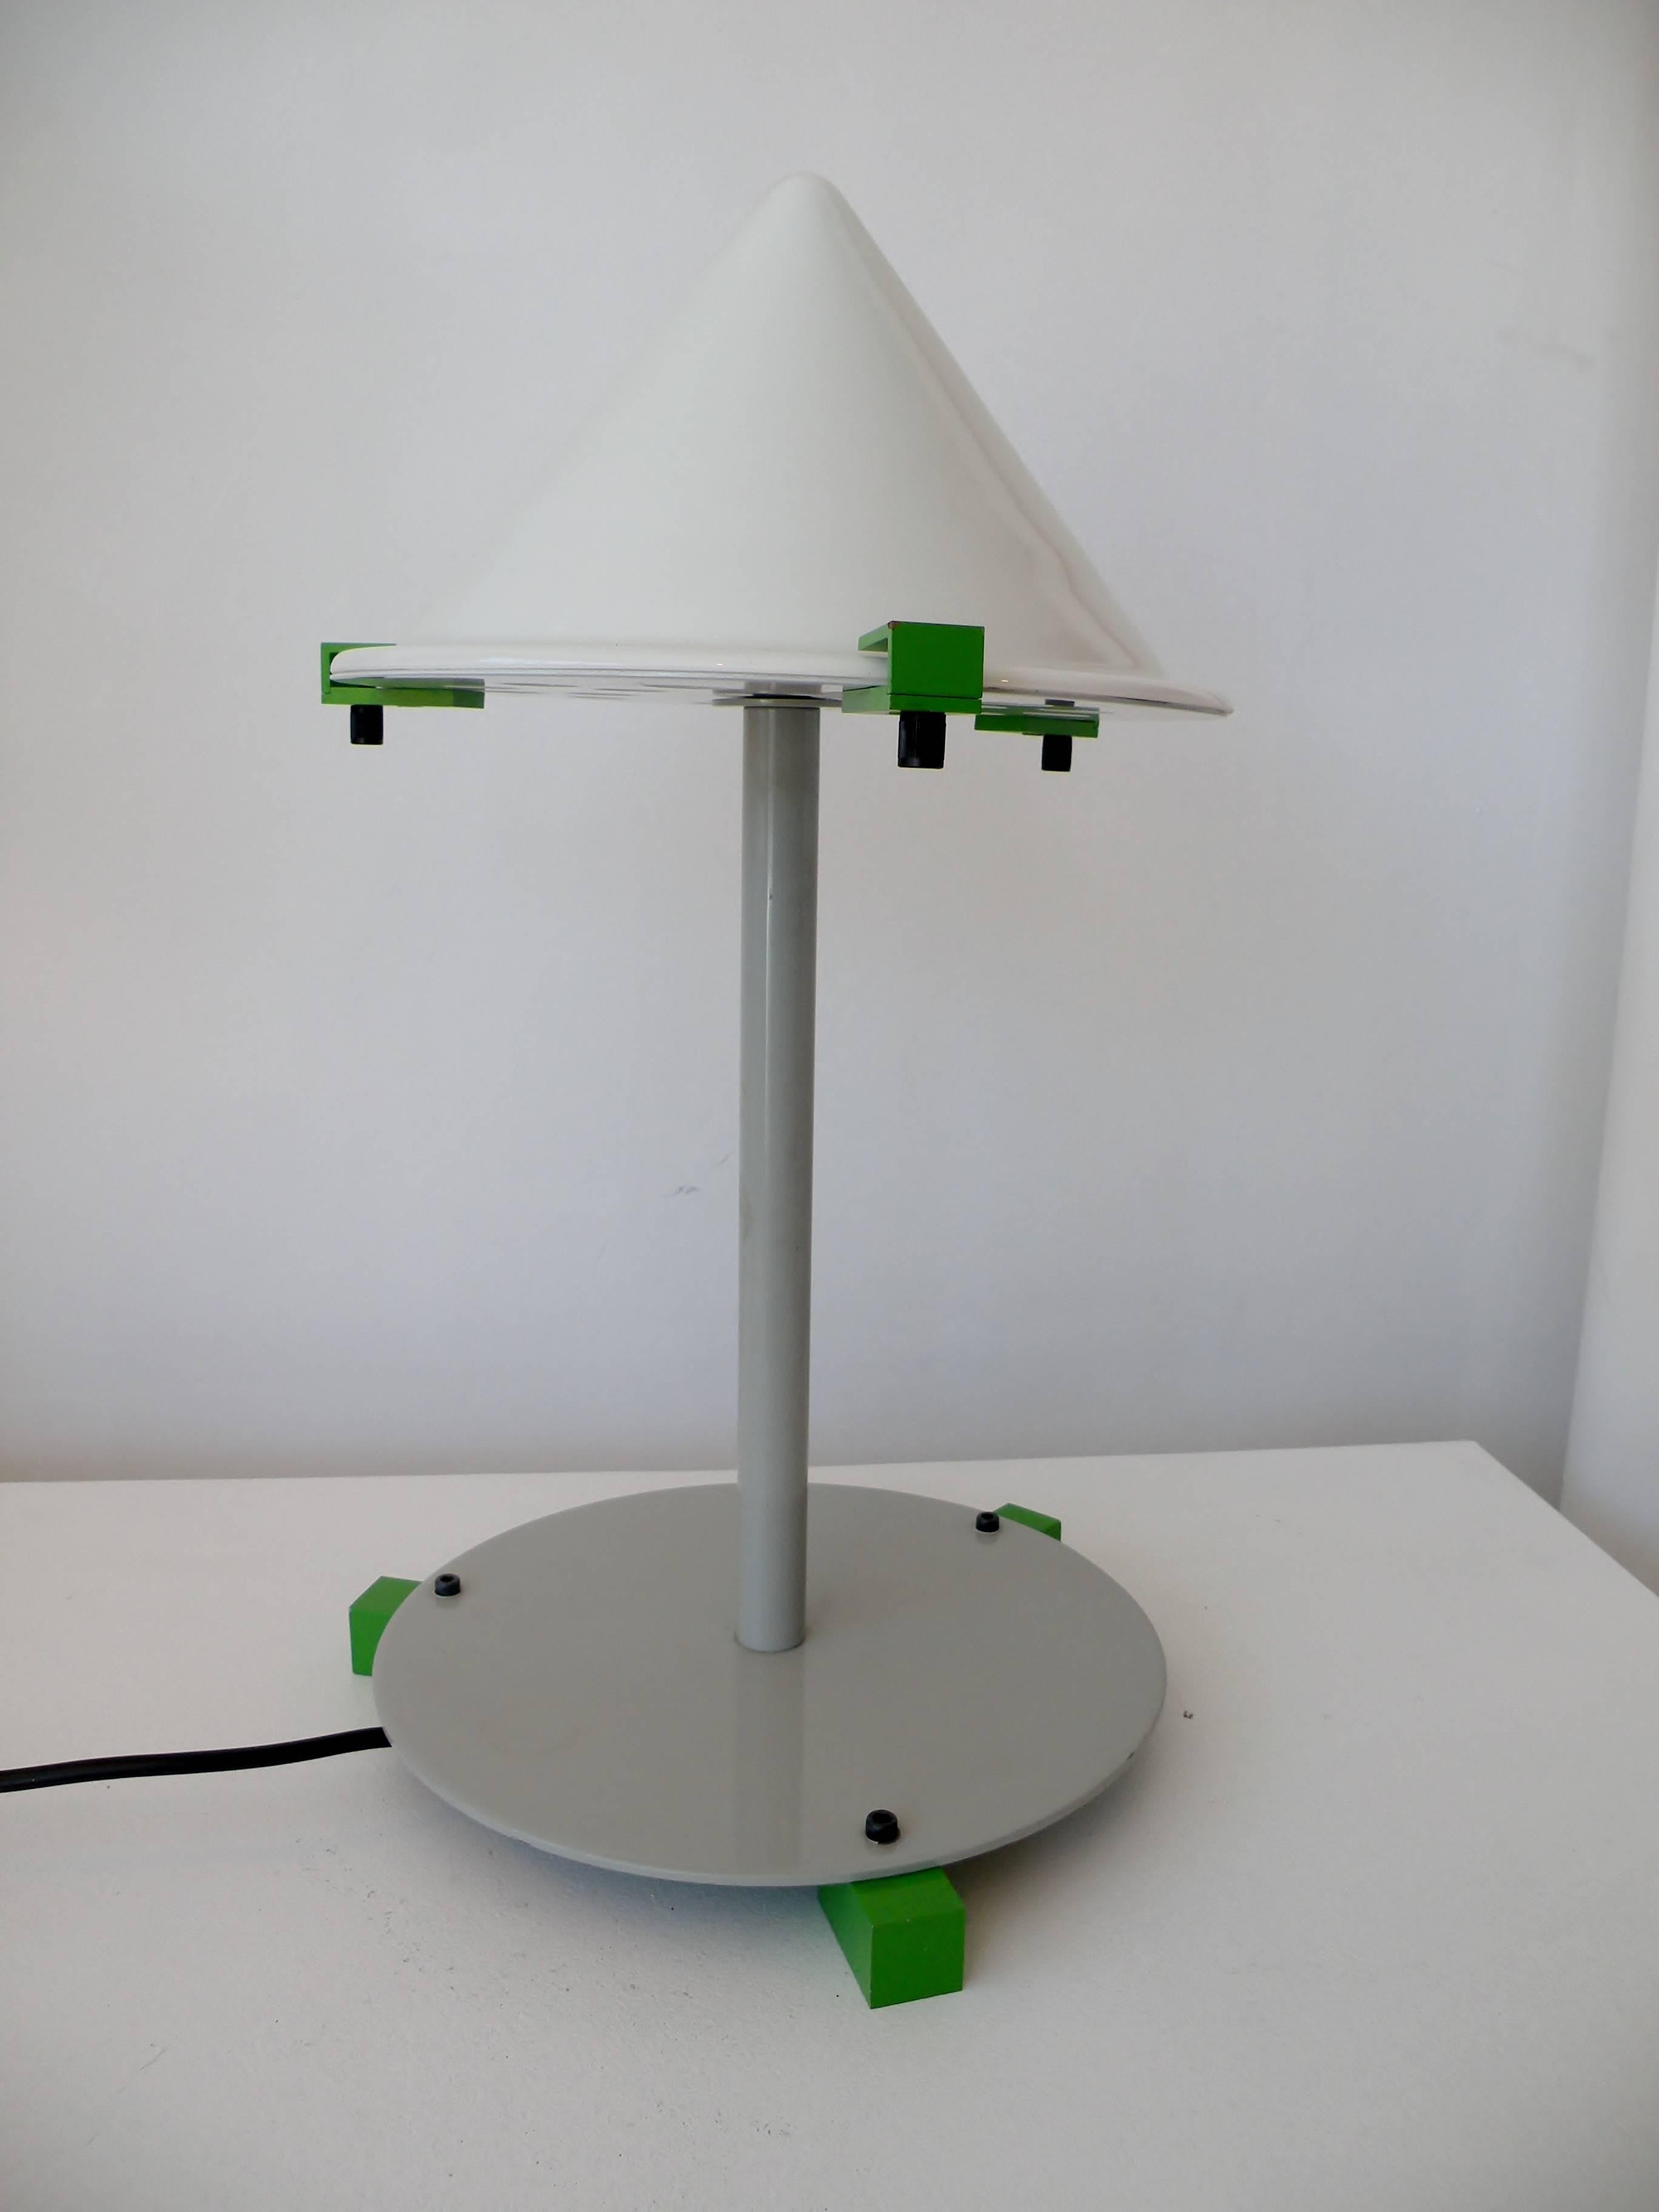 A finely crafted table or desk lamp from the 